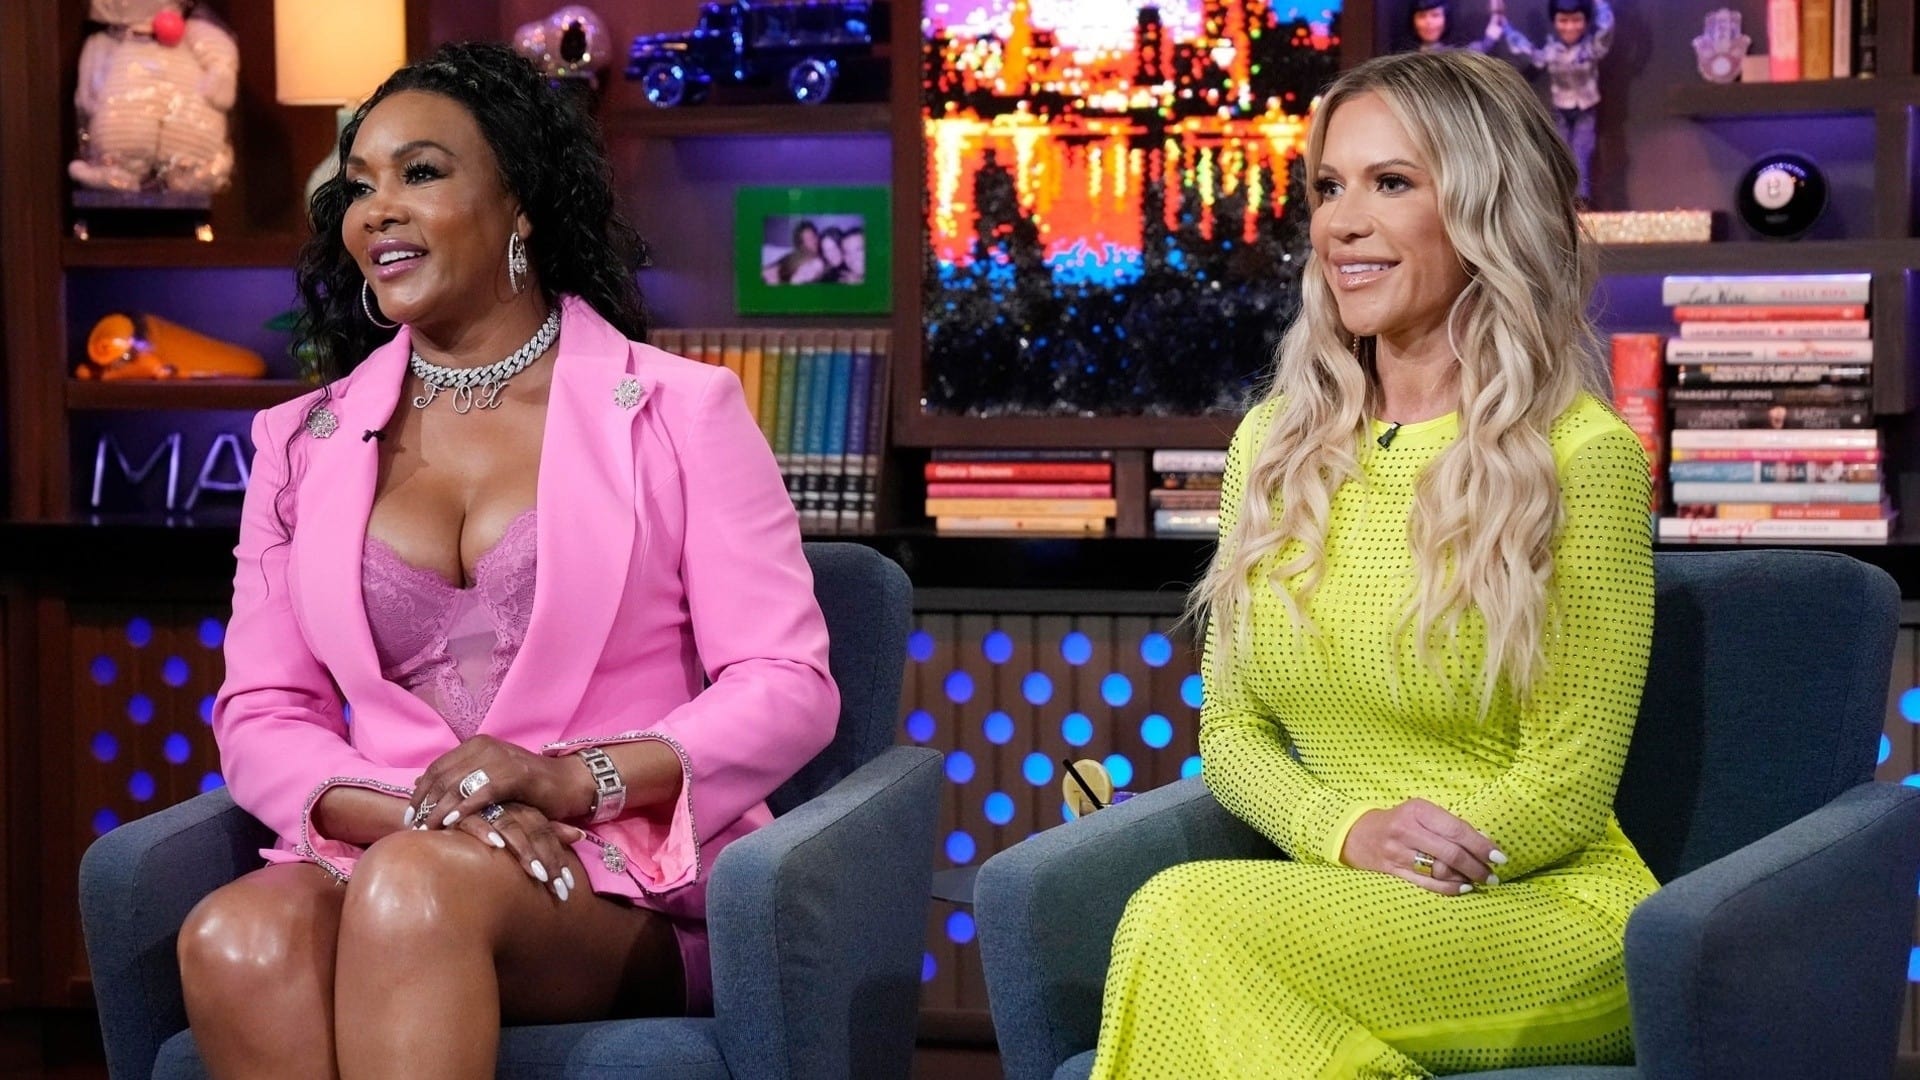 Watch What Happens Live with Andy Cohen Season 20 :Episode 122  Jennifer Pedranti and Vivica A. Fox